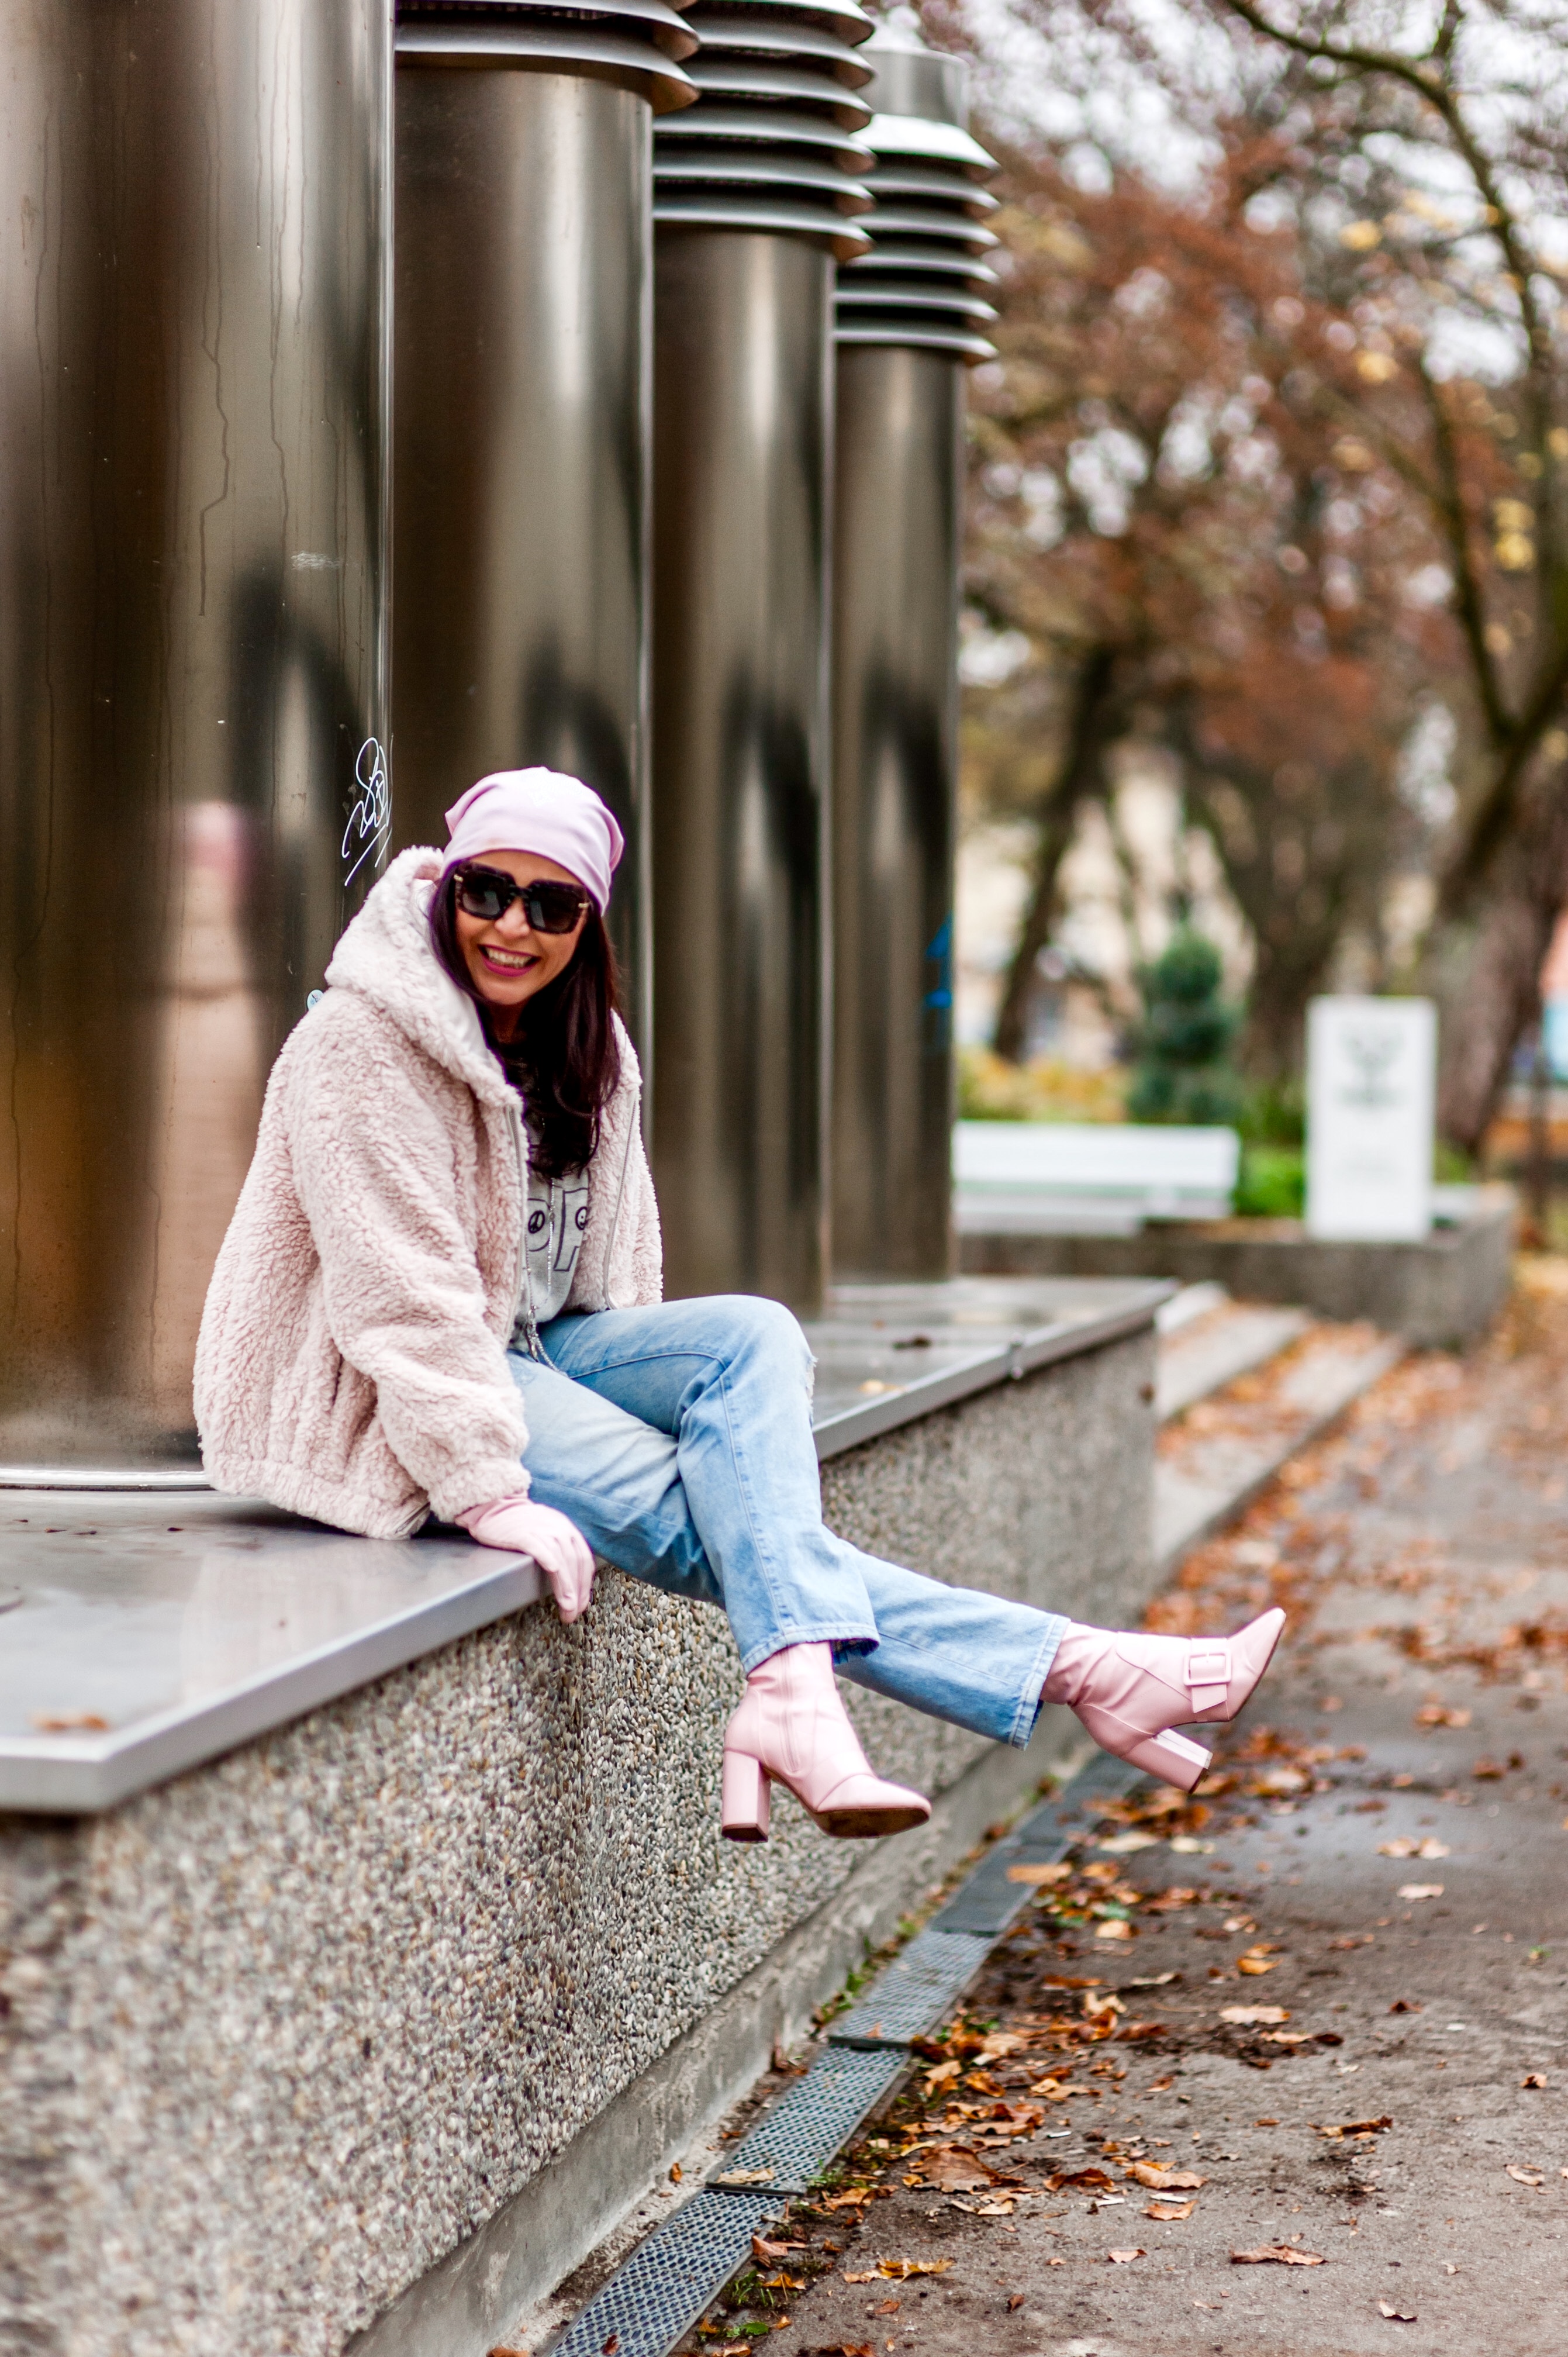 Grace winter outfit, Dolce & gabbana sunglasses, eyewearblogger, cochastyle, sweater, Love collection, GAP jeans, Asos boots, ageless fashion, streetstyle, streetwear, winteroutfit, teddy jacket, Bekleidung, Fashionblog Augsburg,